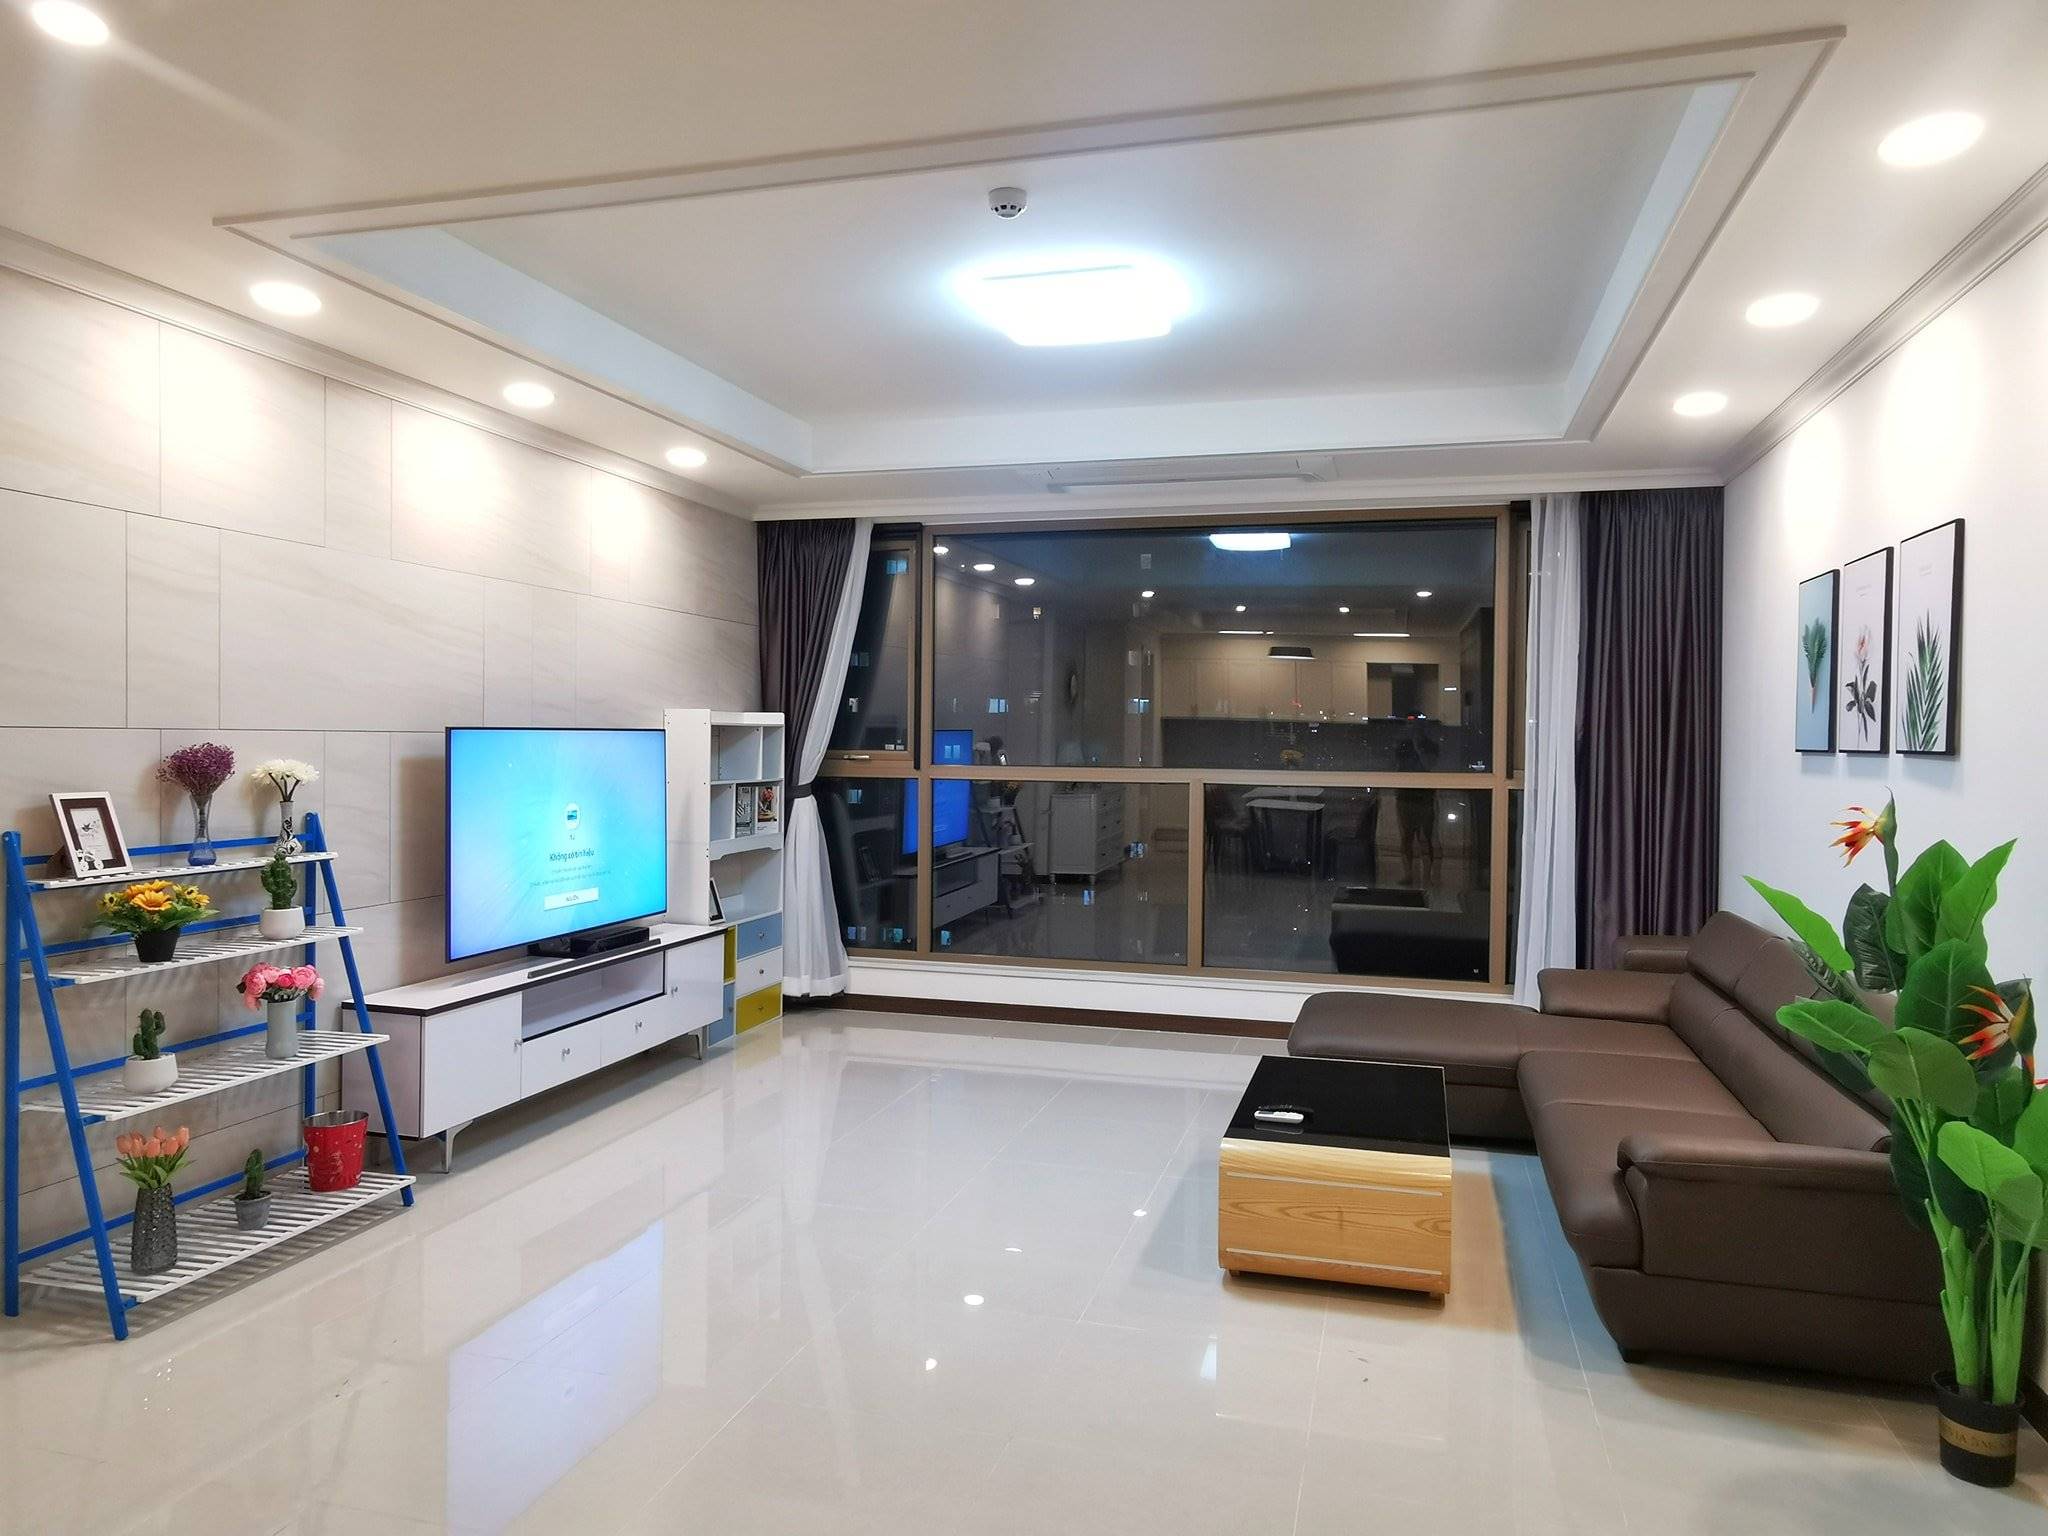 5-star luxury furnished 4BRs apartment for rent in Starlake